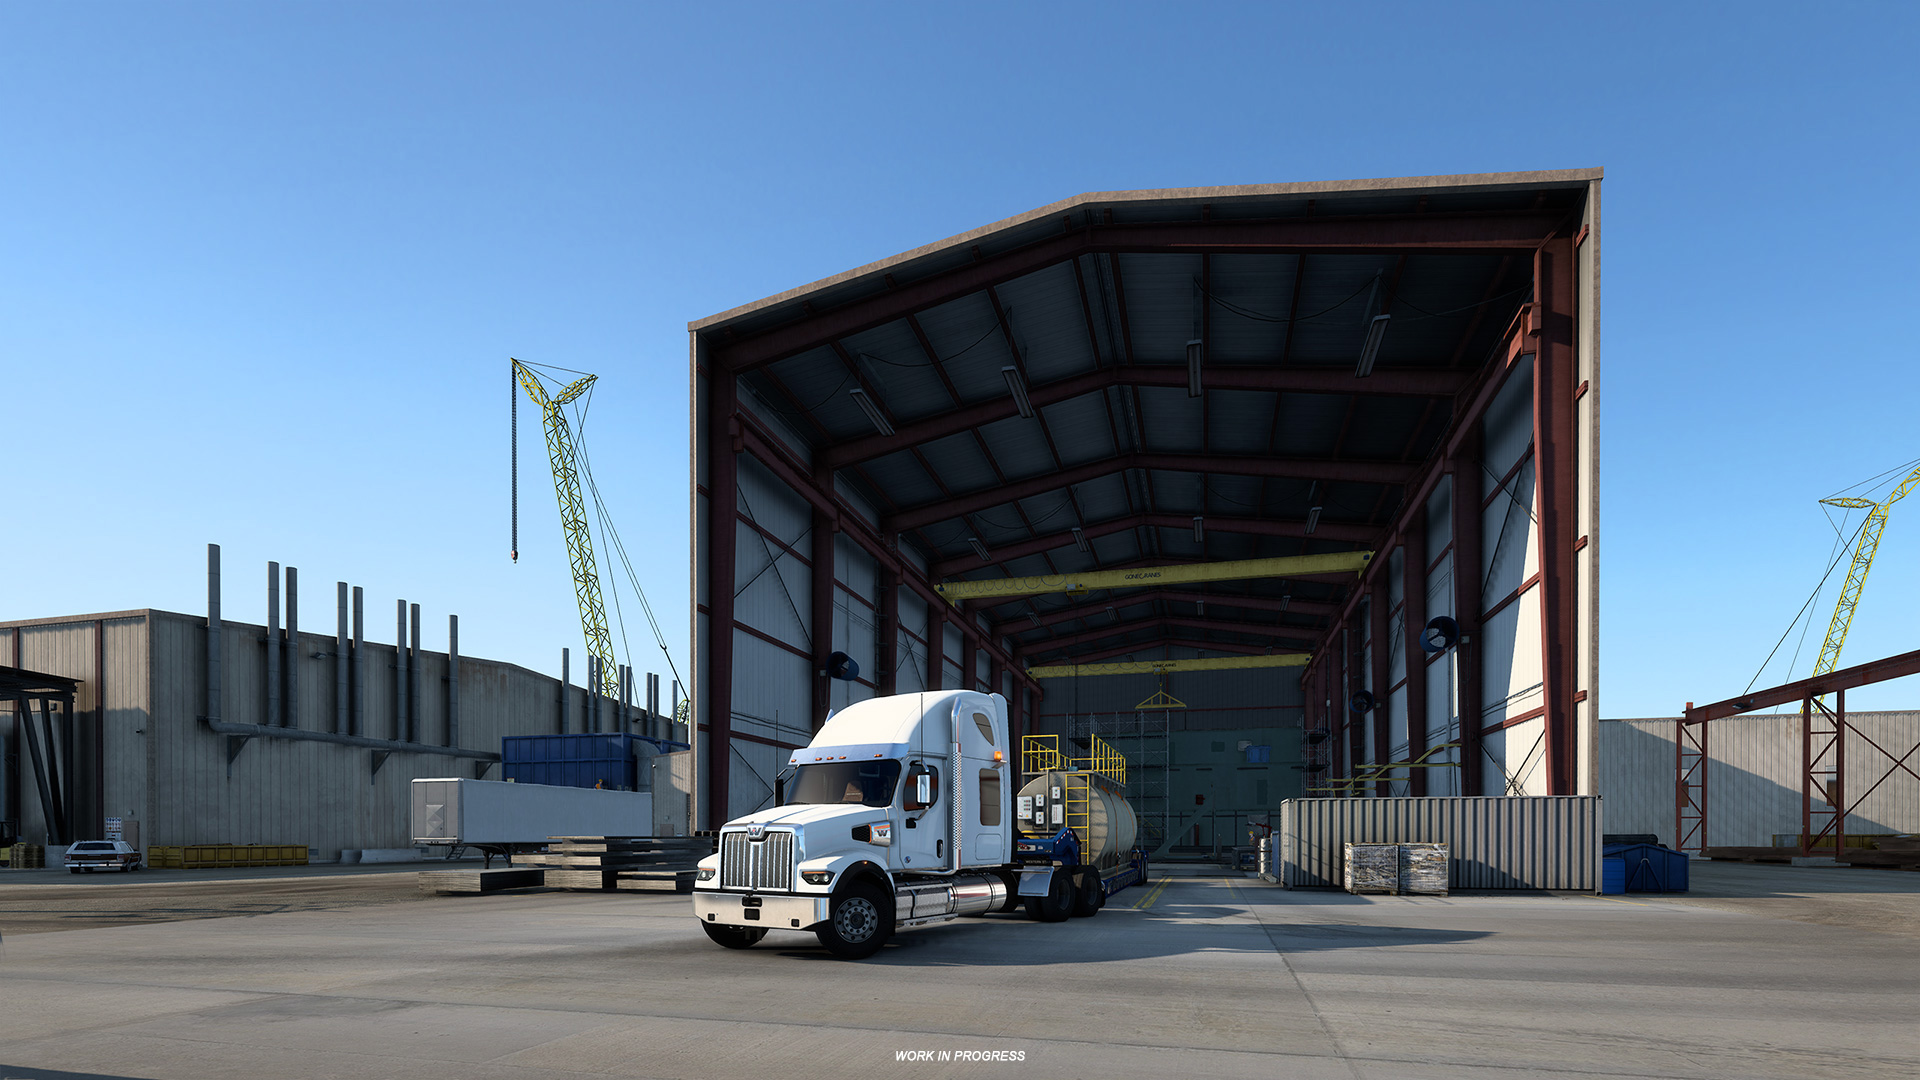 American Truck Simulator devs take us on a tour of Texan offshore shipyards